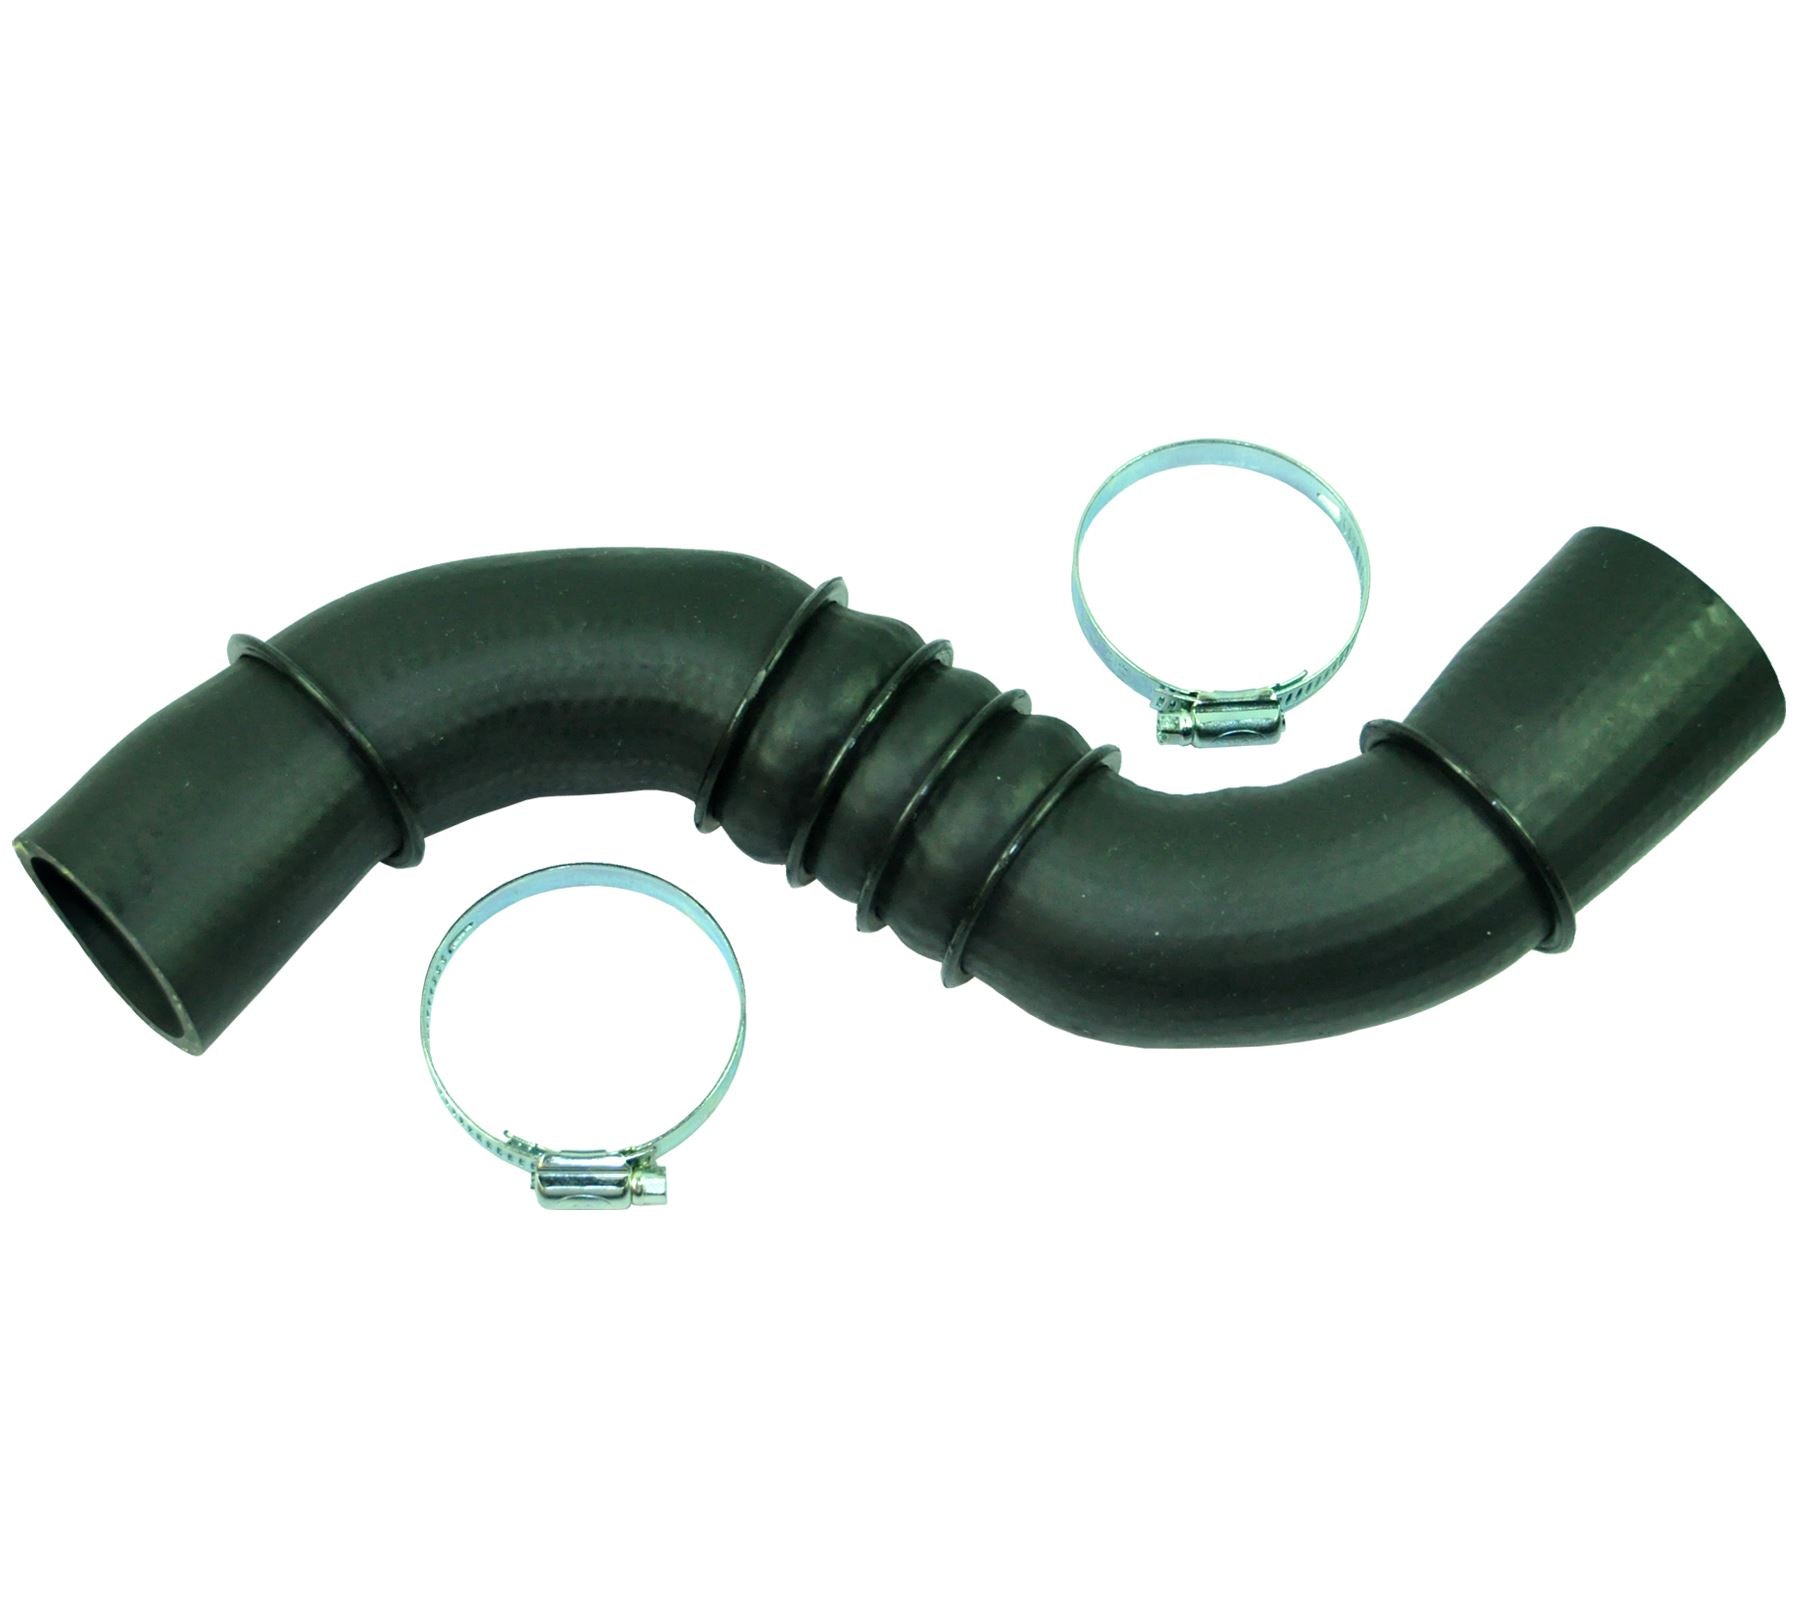 Intercooler Turbo Hose Pipe For Nissan Qashqai 1.5 DCI 14463Jd51A, 14463Jd50A